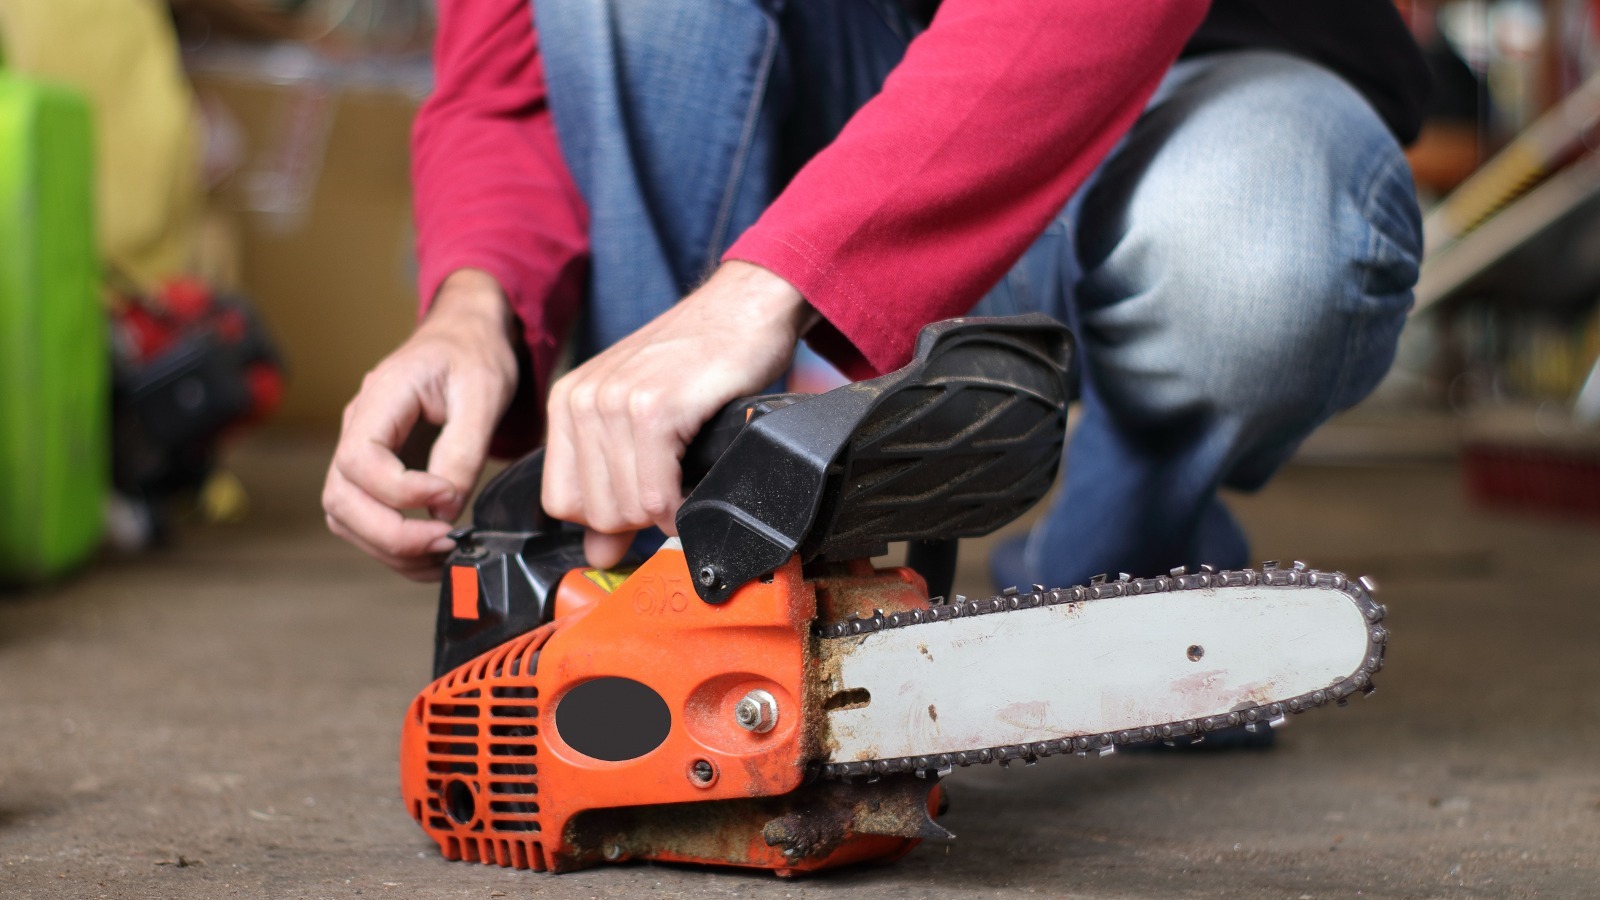 5 Lightweight Chainsaws For More Convenient Use